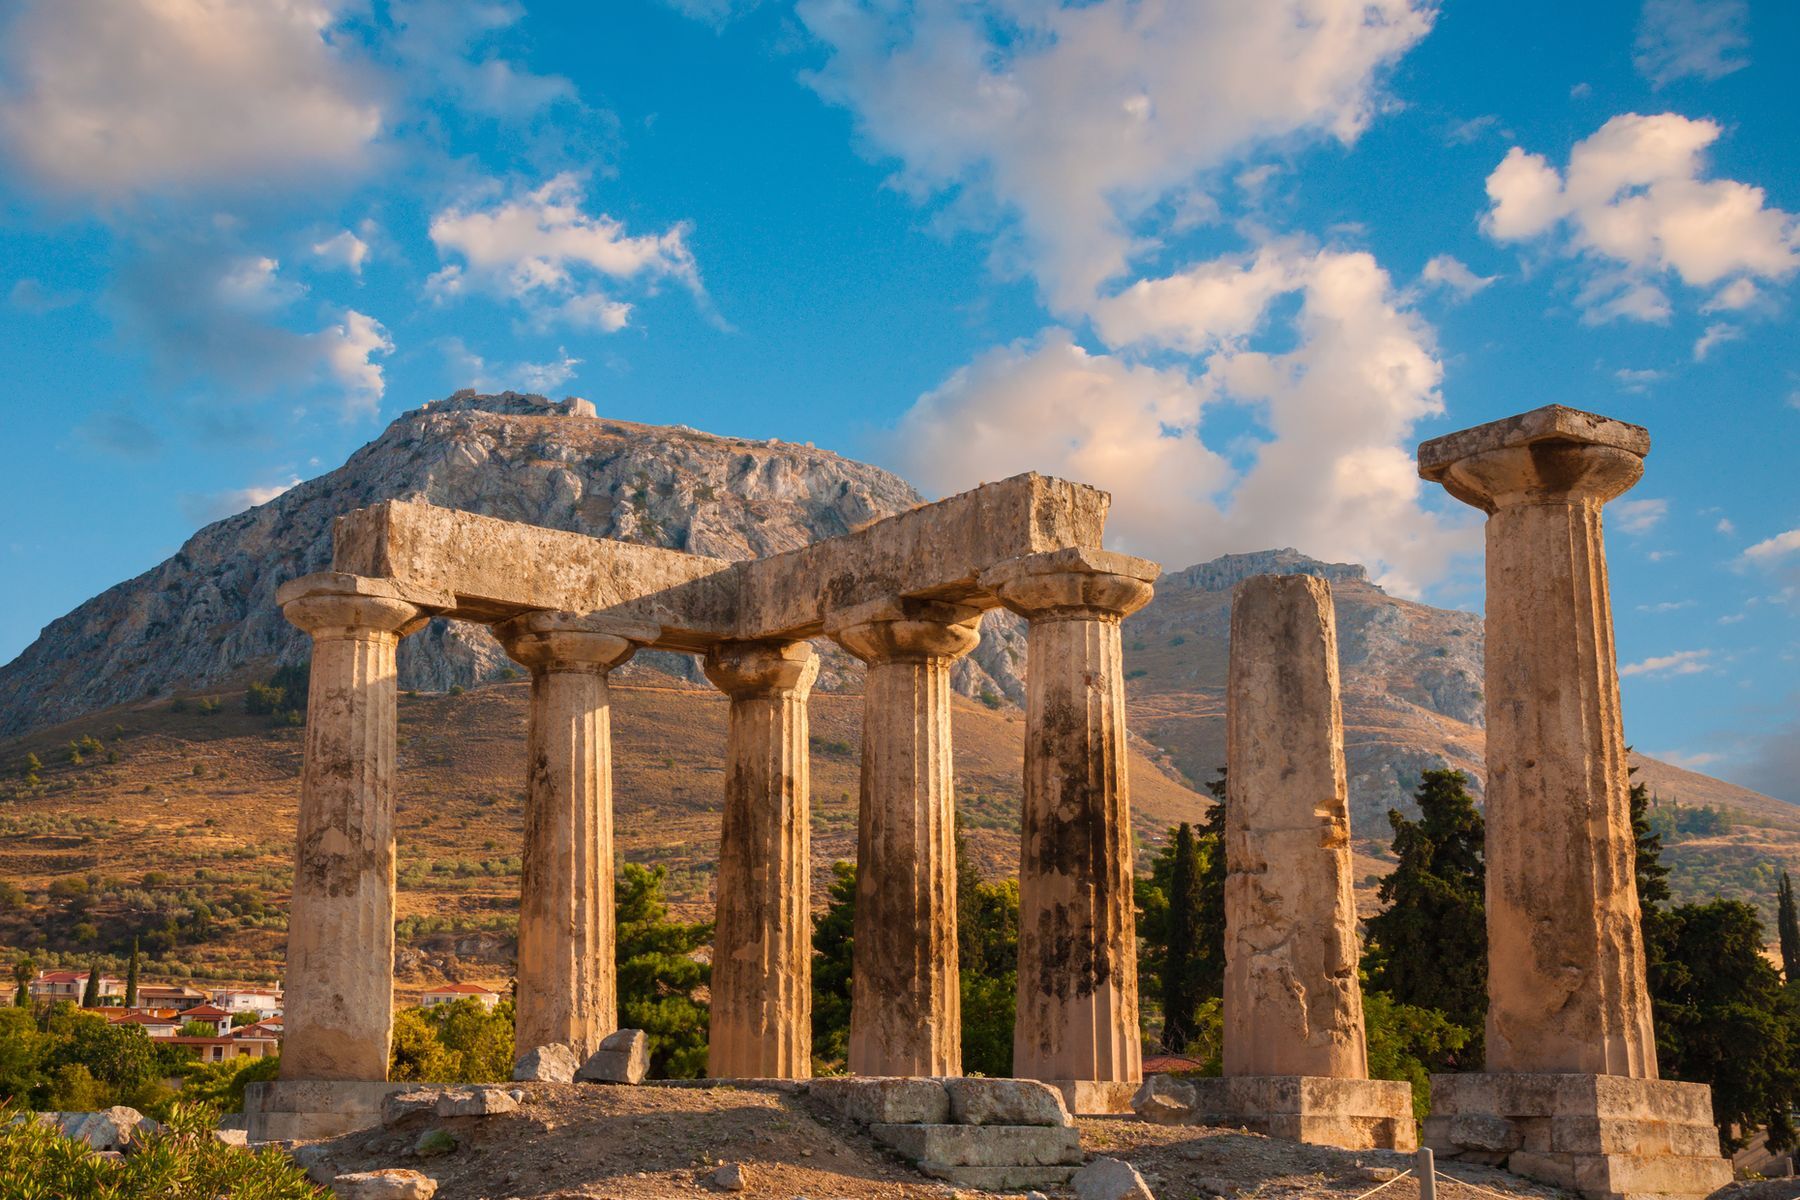 <a href="https://www.discovergreece.com/peloponnese/corinth" rel="noreferrer noopener">Corinth’s</a> strategic geographical location made it a crossroads of ancient Greece, increasing both its prosperity as well as greed among its enemies. The ruins of ancient Corinth, with its Temple of Apollo and theatre, are sure to fascinate history buffs. The latter will surely want to continue their cultural immersion along the trails to the <a href="https://vivreathenes.com/l-acrocorinthe-une-citadelle-imprenable-a-une-heure-d-athenes.html" rel="noreferrer noopener">Acrocorinth citadel</a> and its artefact-filled archaeological museum. Also enjoy spectacular views of the Saronic Gulf from the 19th-century <a href="https://www.ulysses.travel/en/corinth-canal-greece/" rel="noreferrer noopener">Corinth Canal</a>.